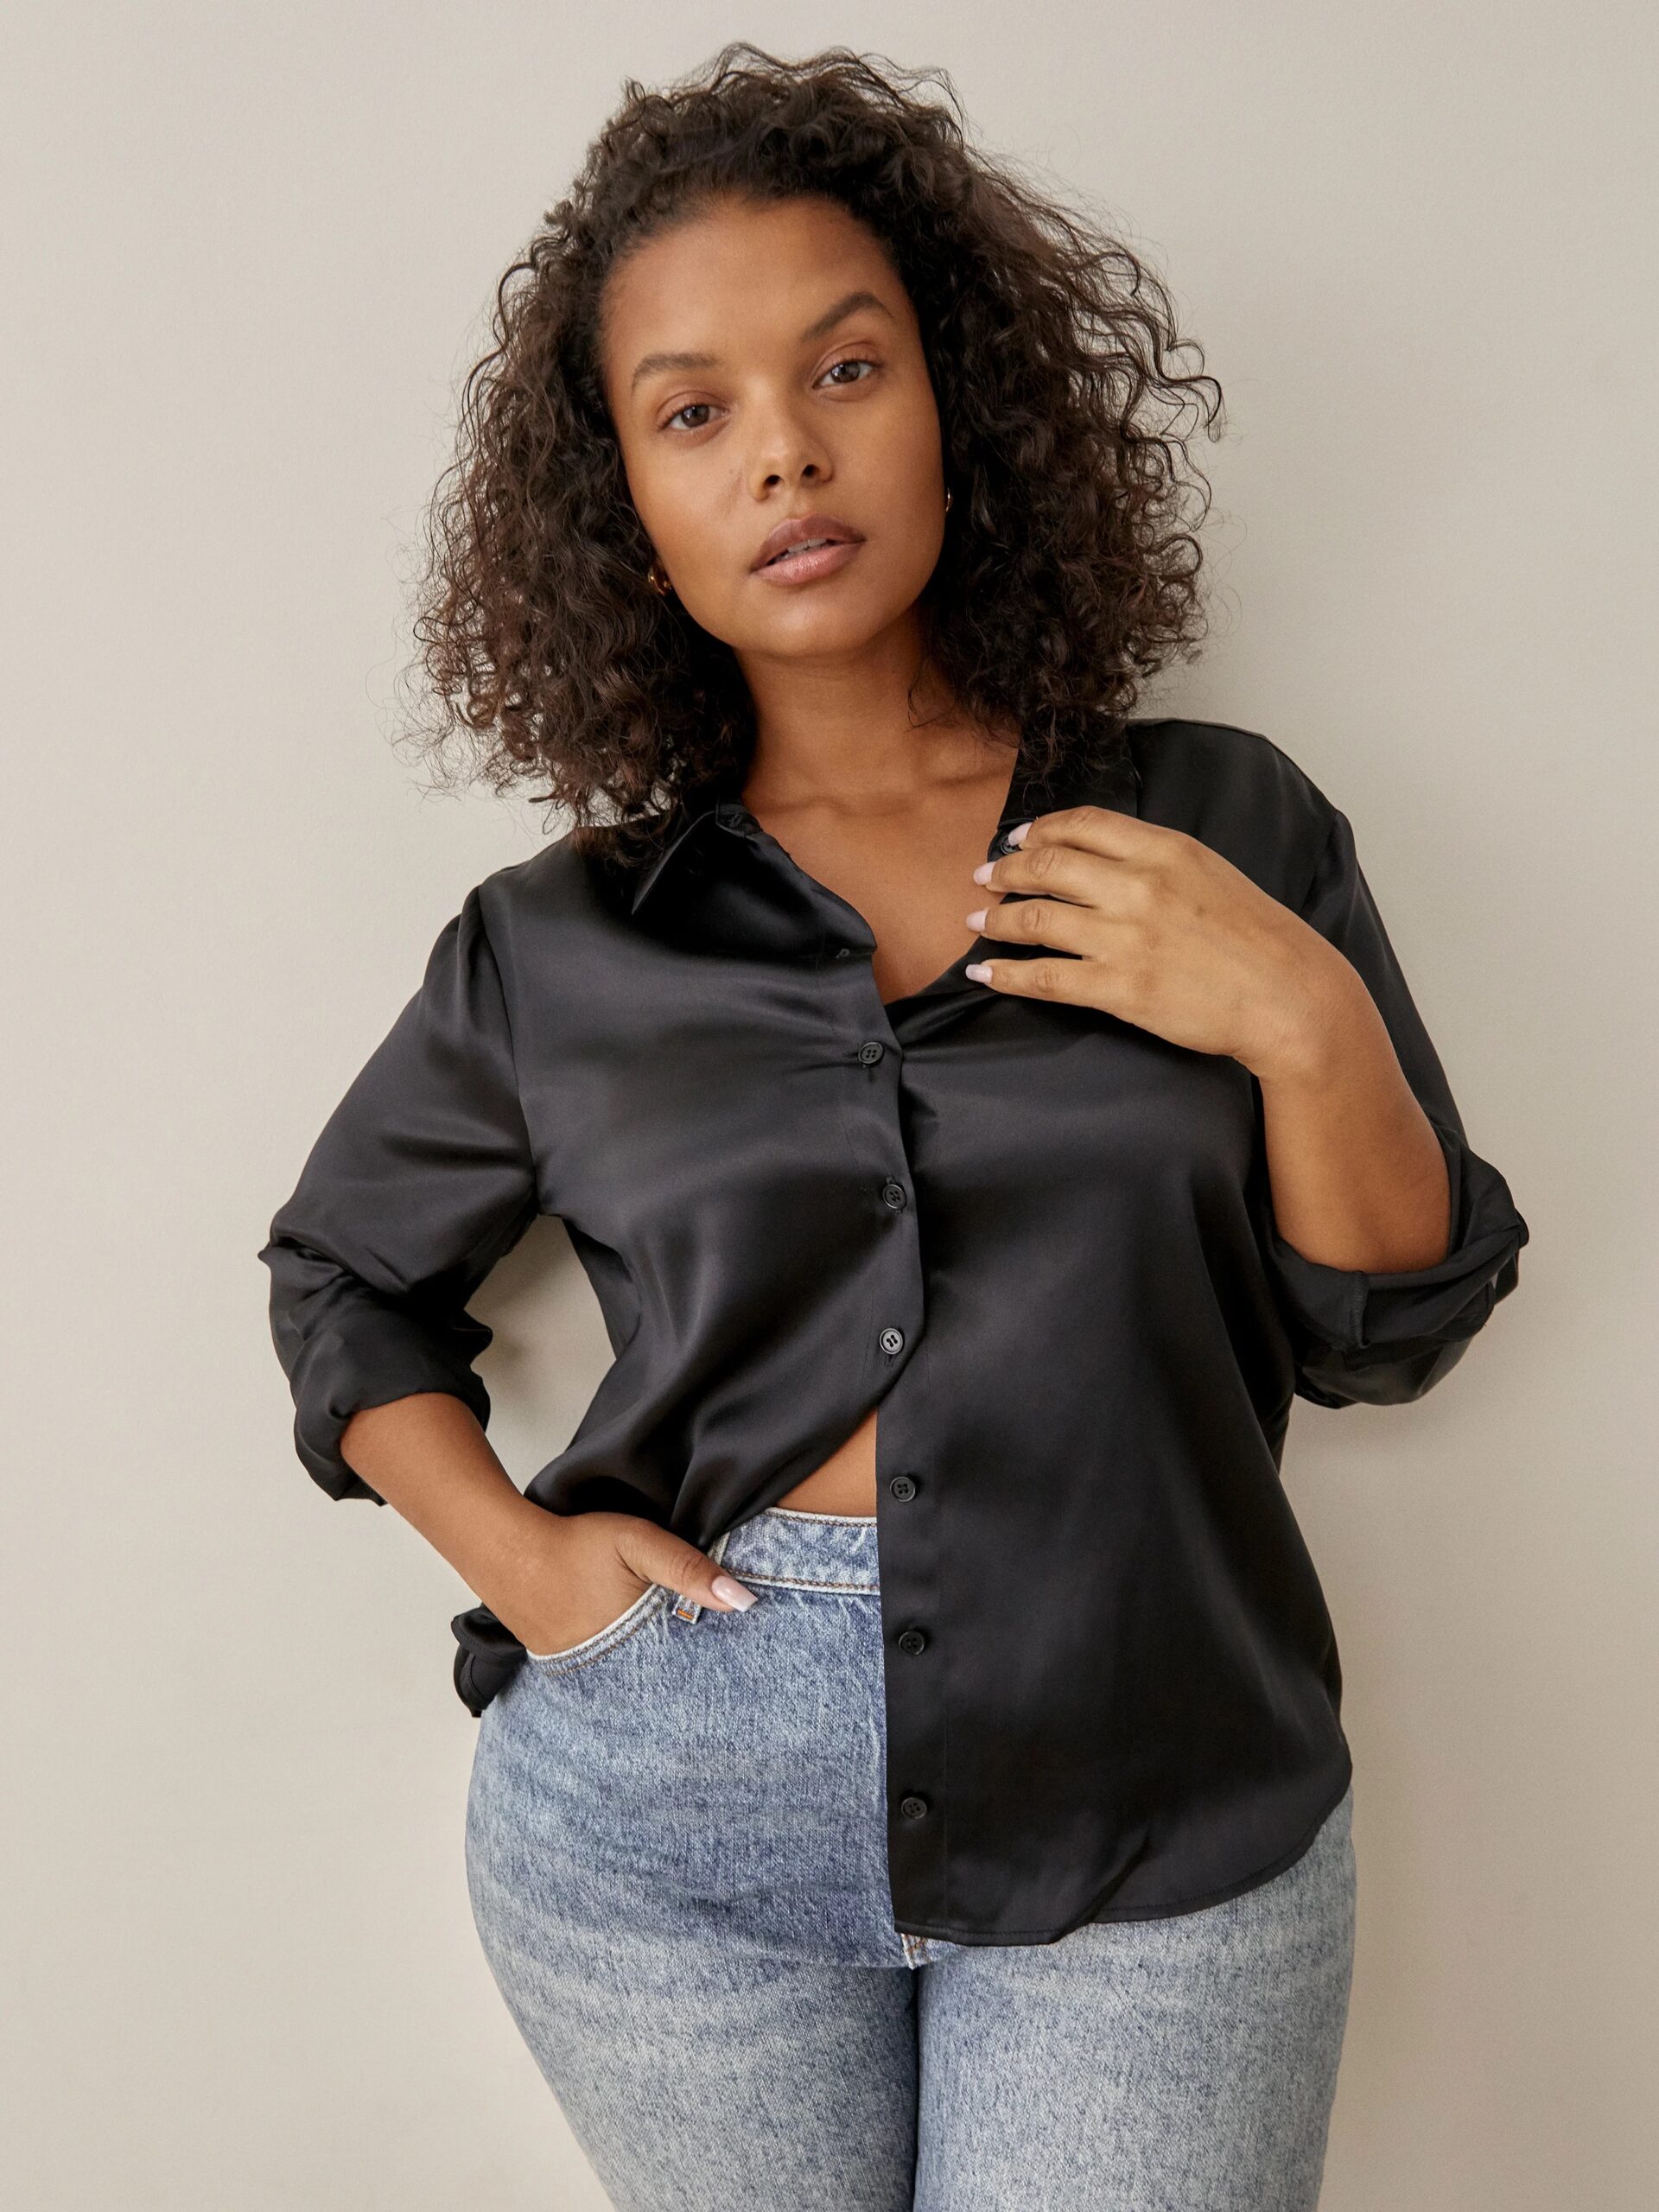 A woman with curly hair wearing a black shirt and blue jeans stands against a light backdrop, one hand partially tucked into her pocket.